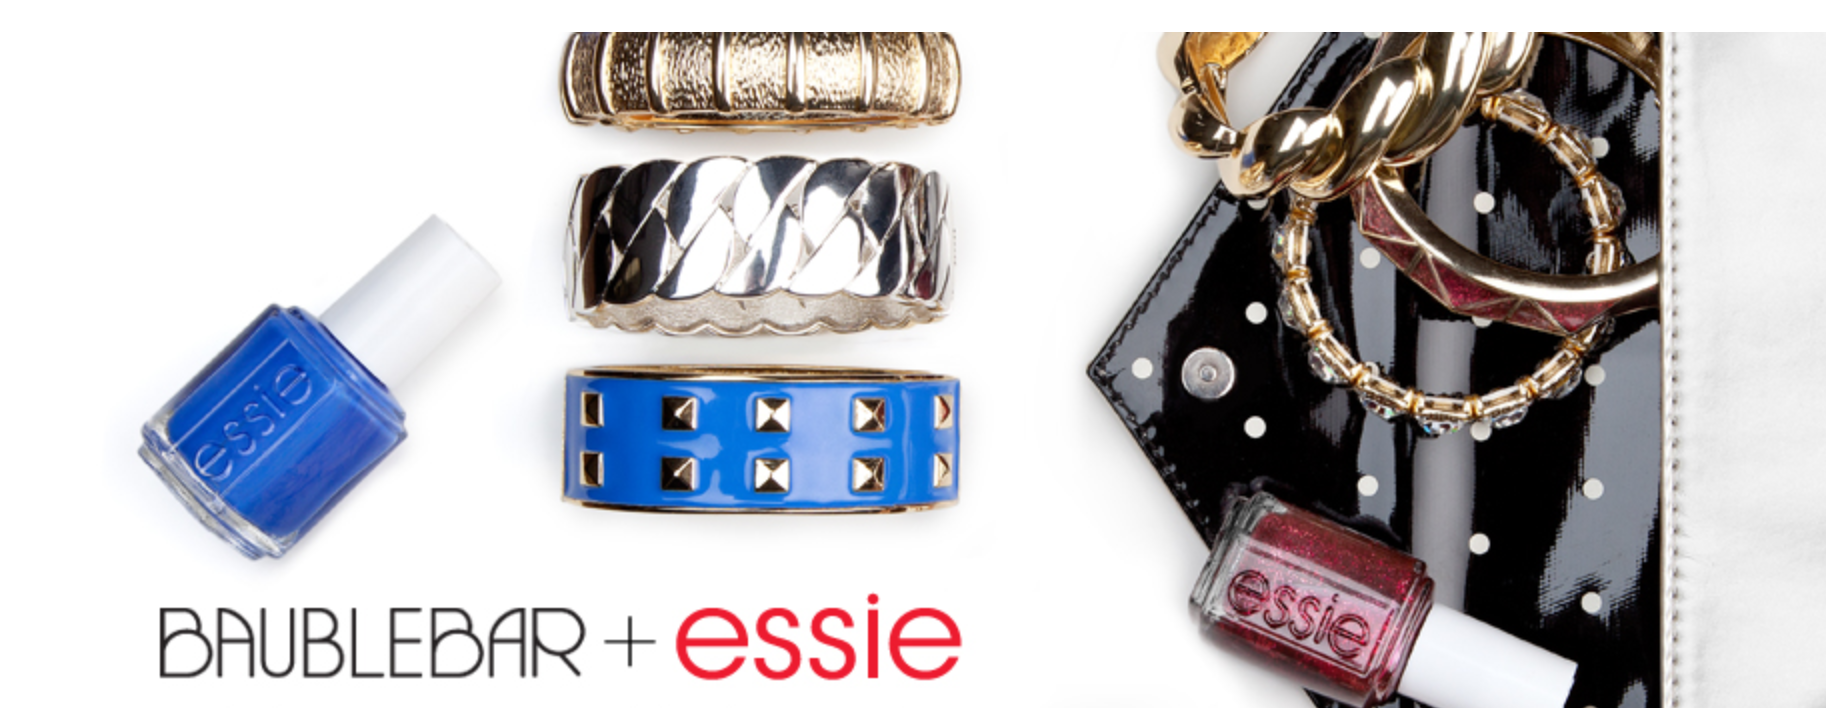 BaubleBar + Essie: The Ultimate Collaboration